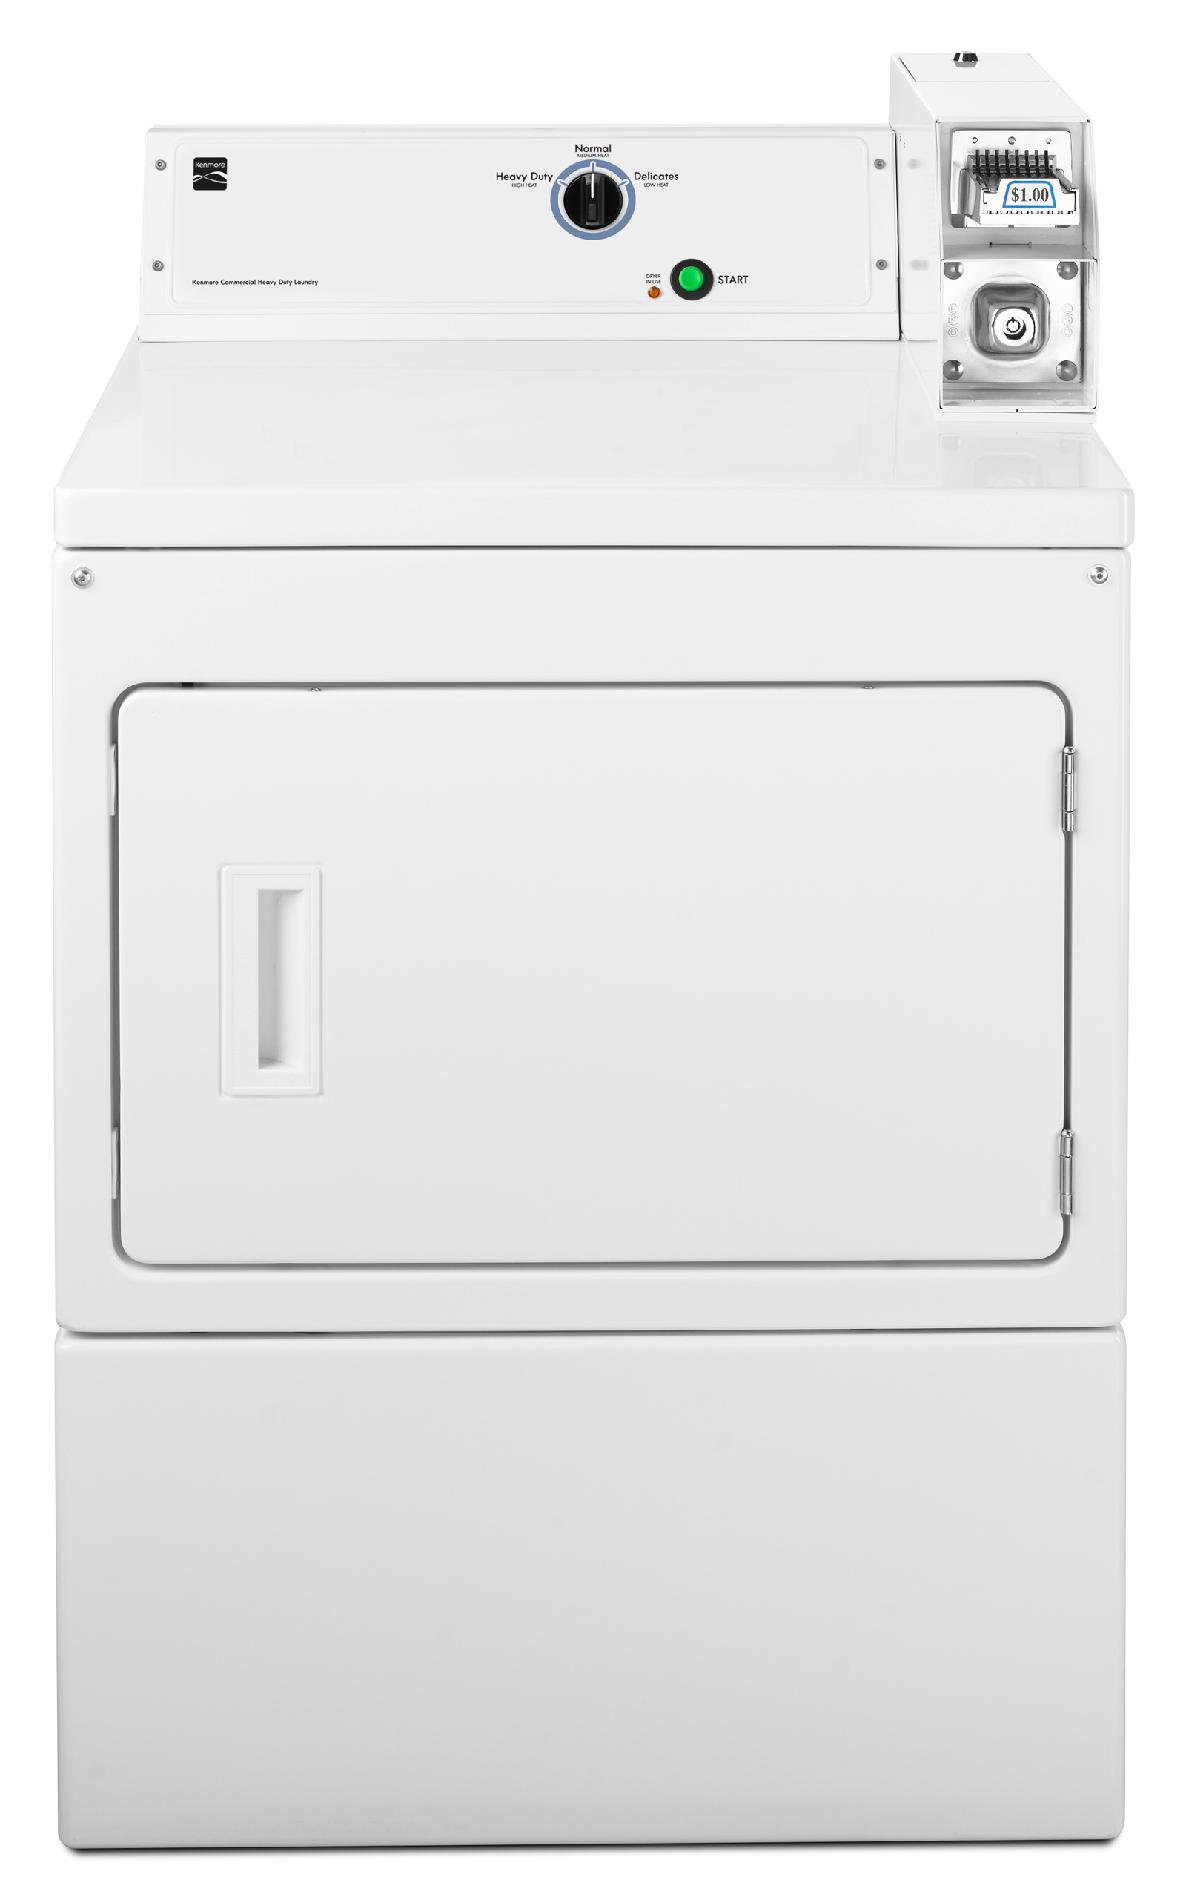 Kenmore 7.4 cu. ft. Coin-Operated Electric Dryer - White